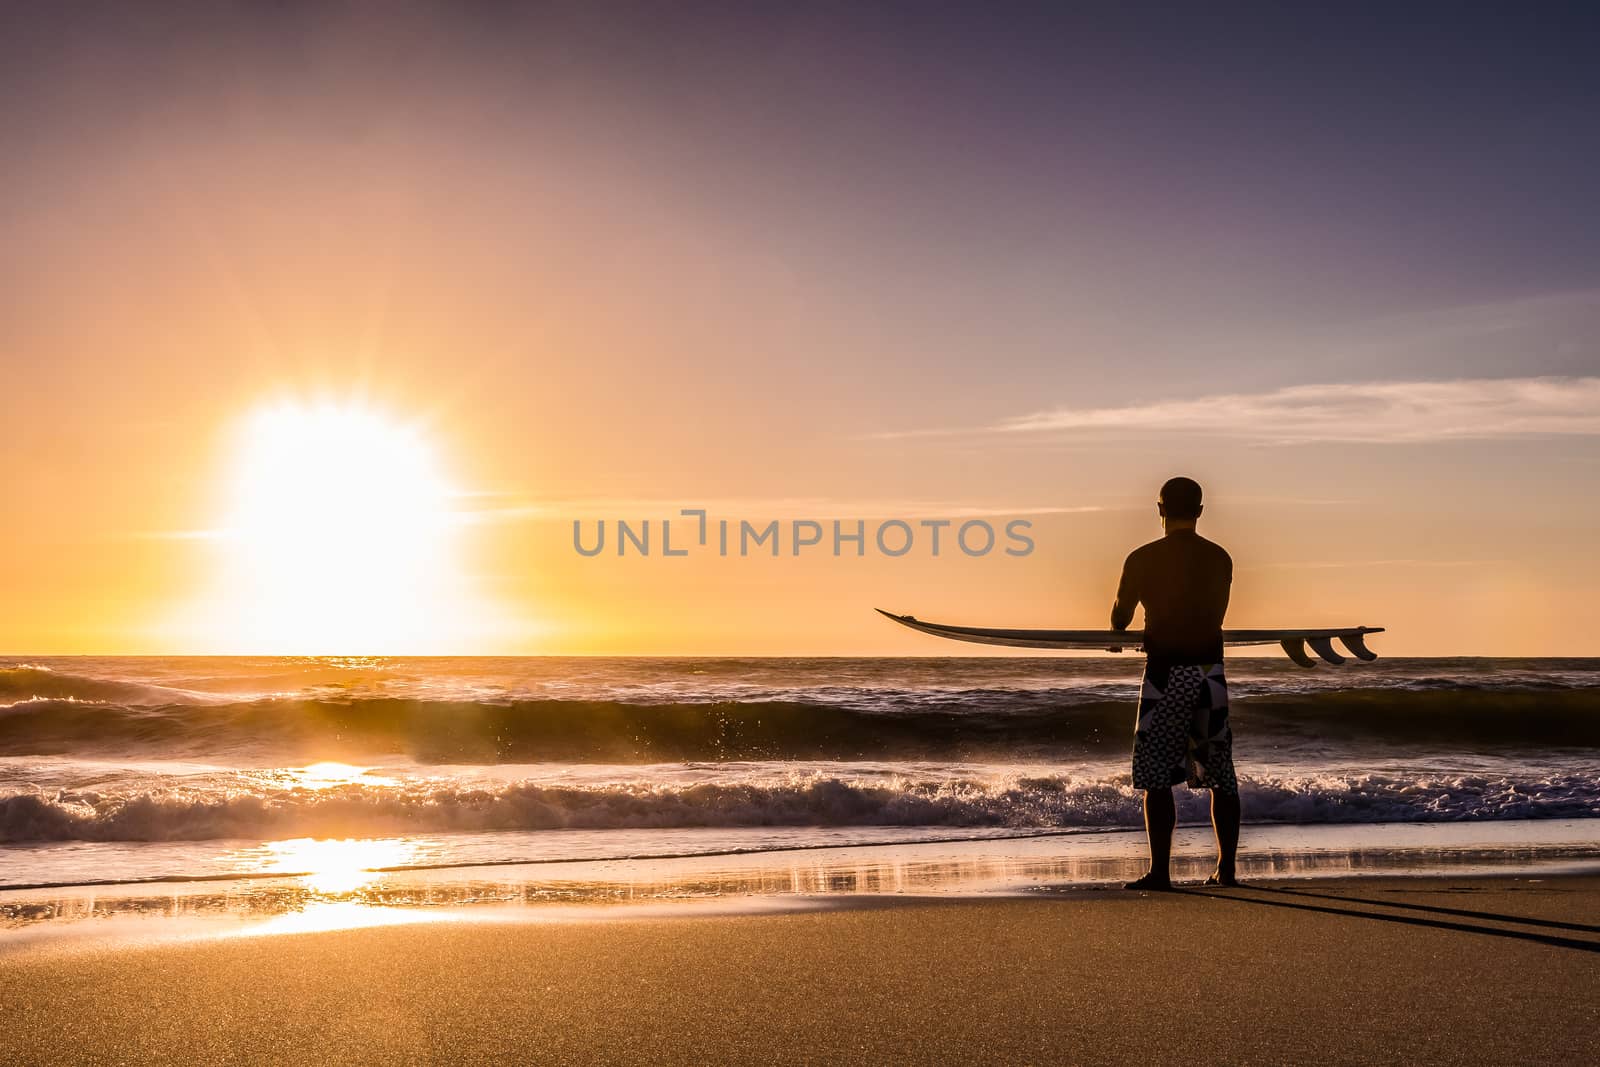 Surfer watching the waves at sunset in Portugal.